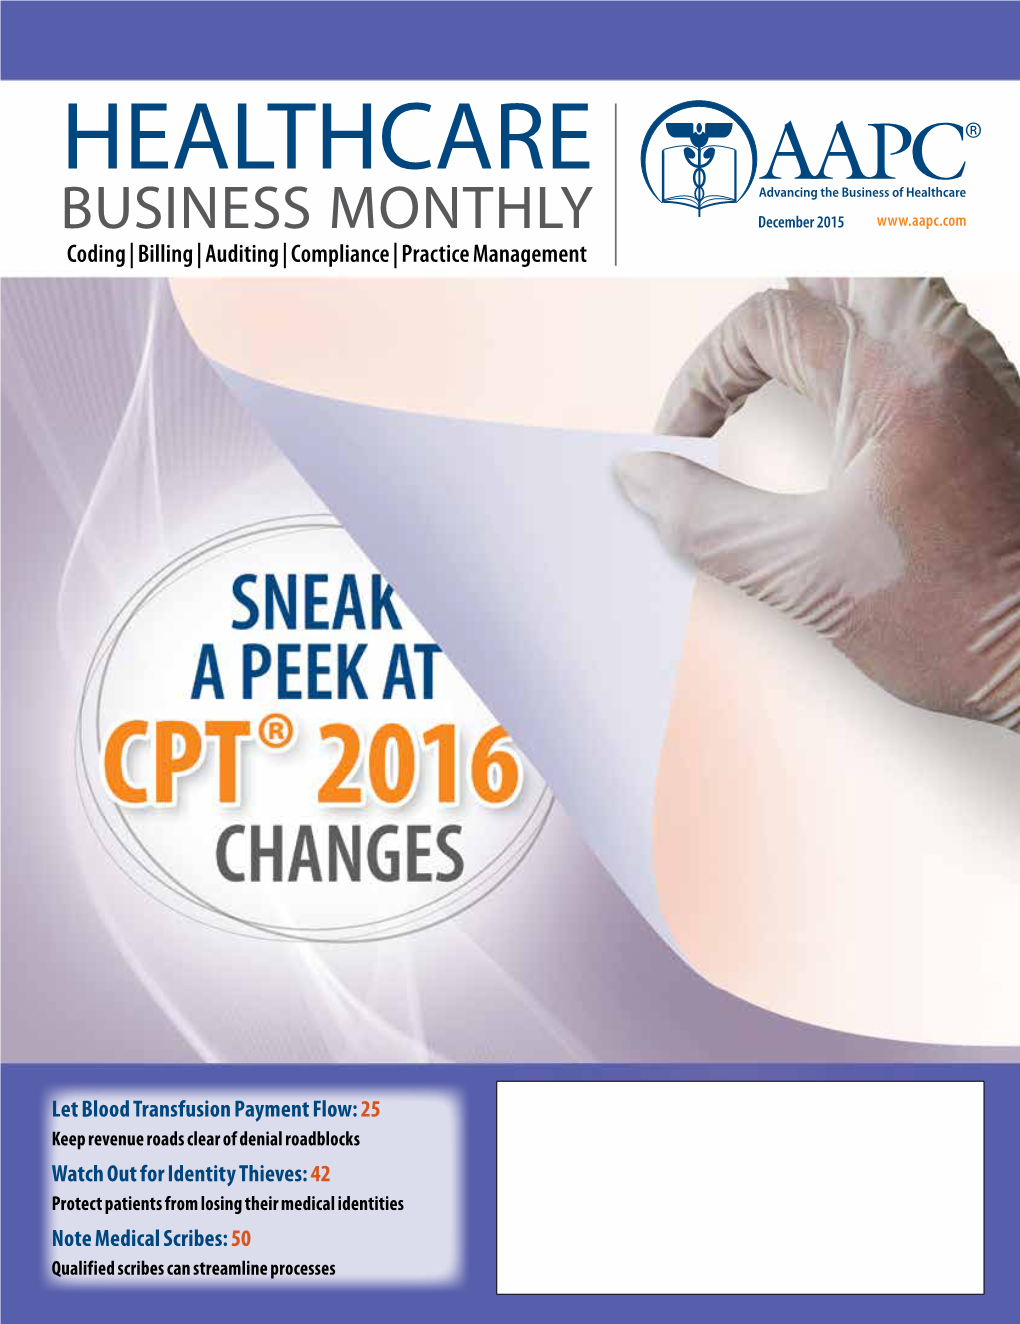 HEALTHCARE BUSINESS MONTHLY December 2015 Coding | Billing | Auditing | Compliance | Practice Management